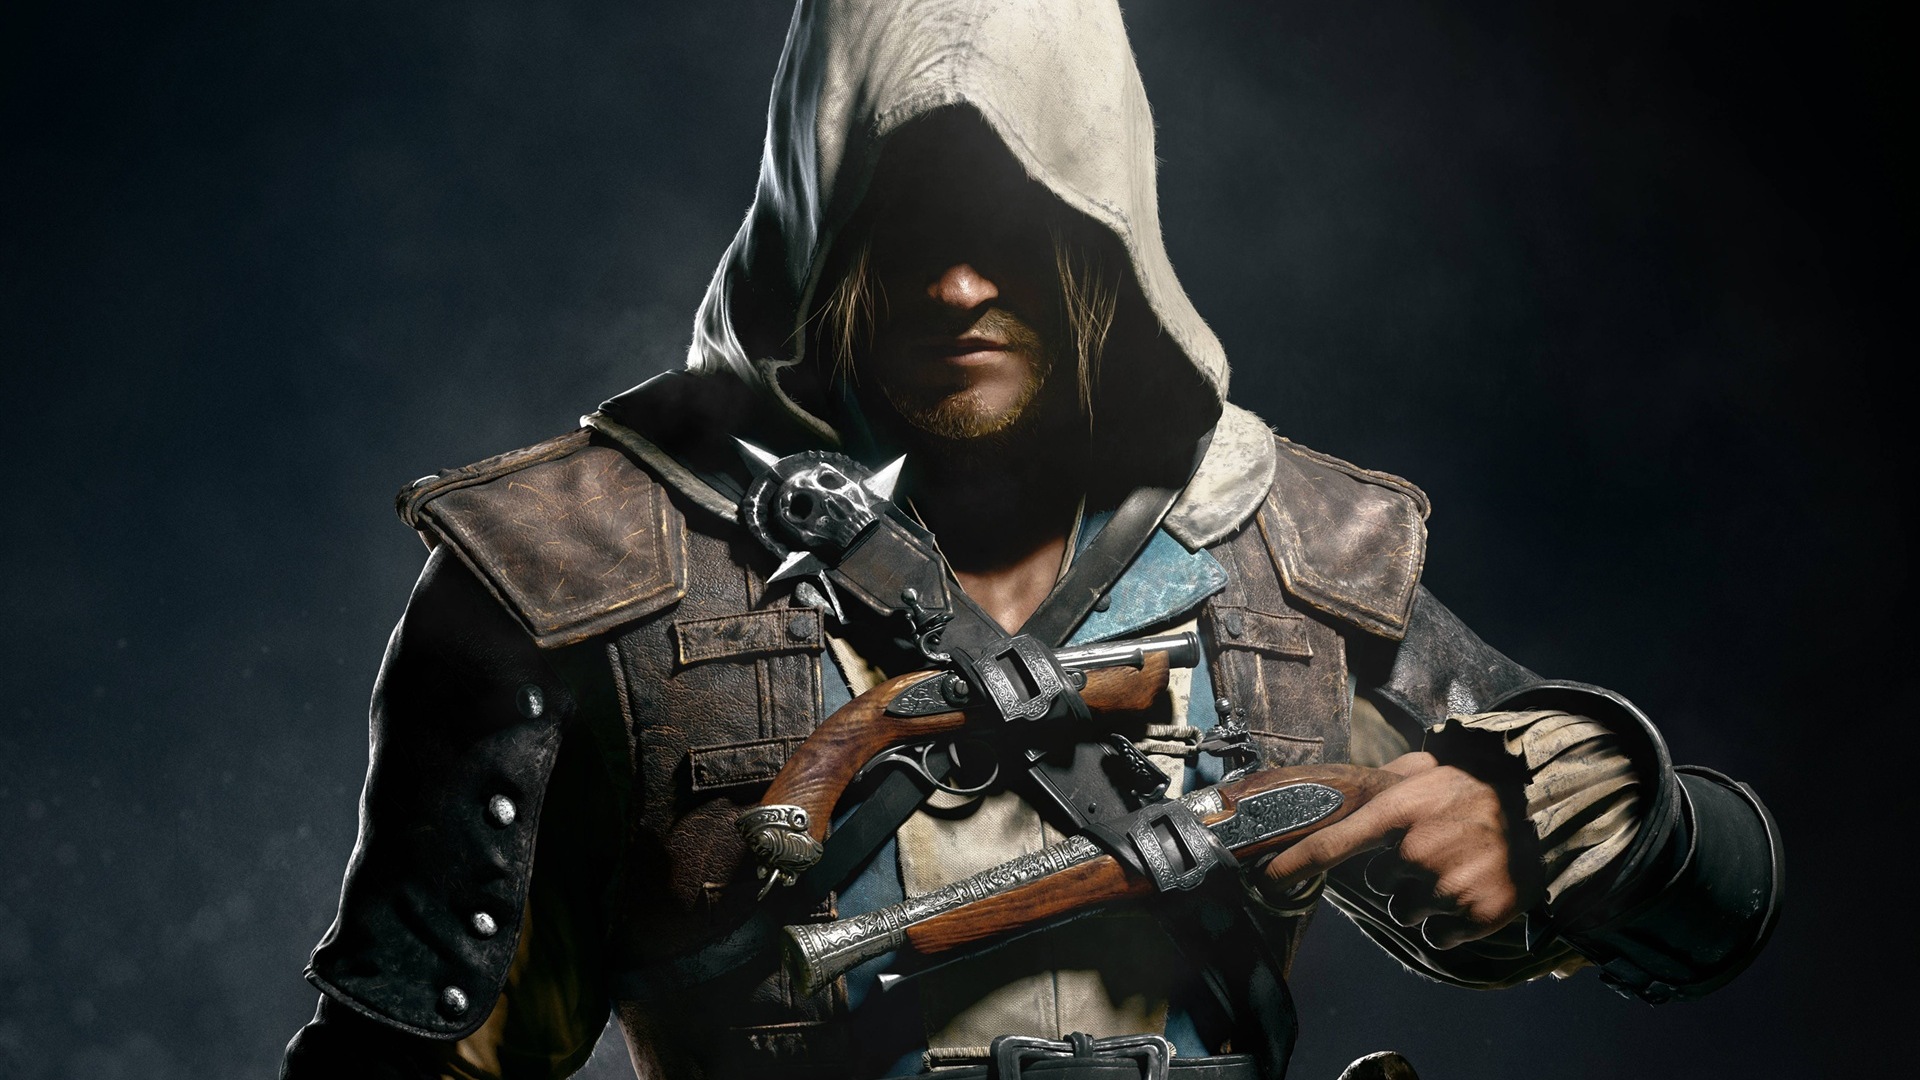 Creed IV Assassin: Black Flag HD wallpapers #13 - 1920x1080